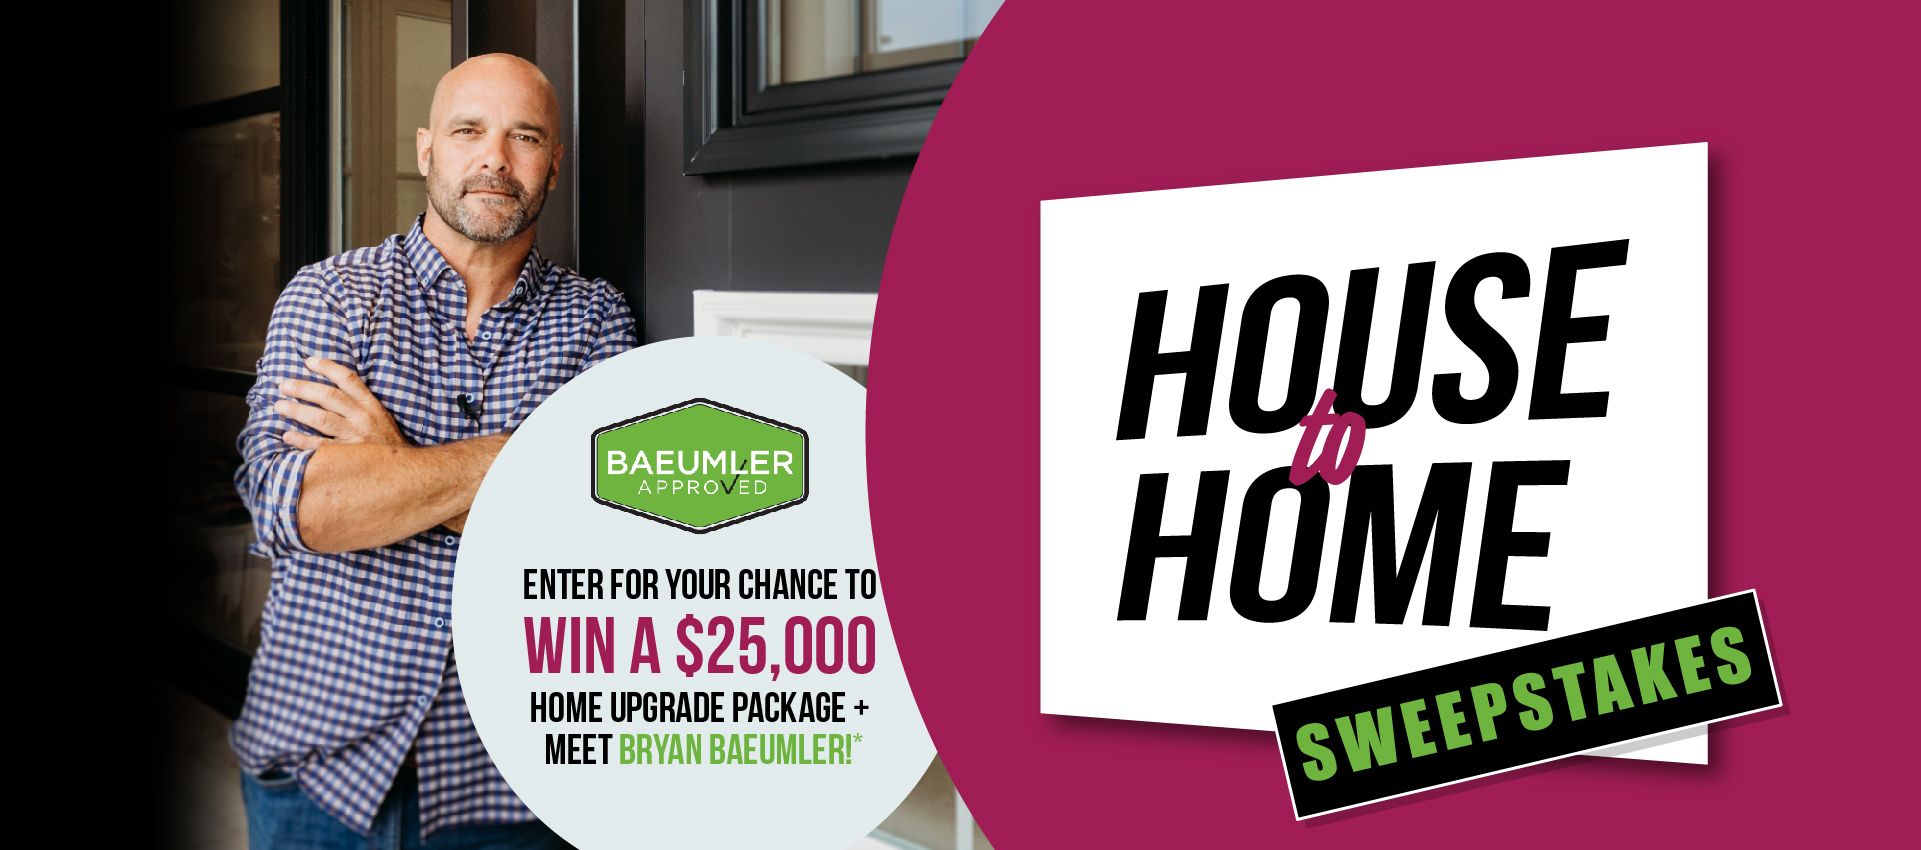 Win a $25,000 Home Upgrade Package From Canadian Choice Windows & Doors